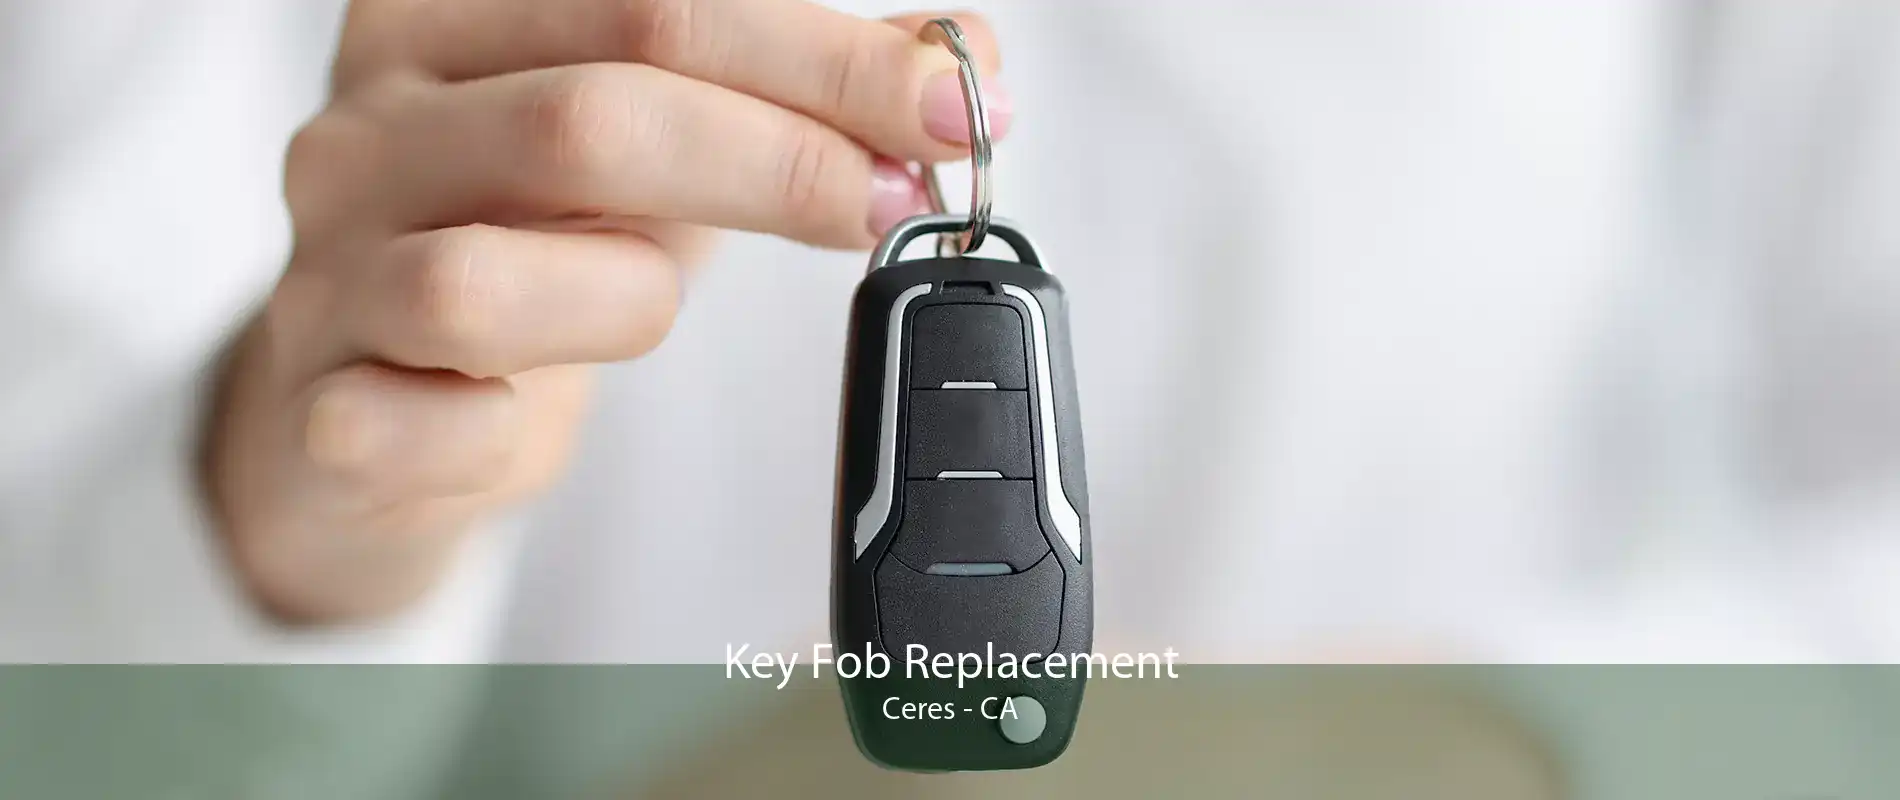 Key Fob Replacement Ceres - CA